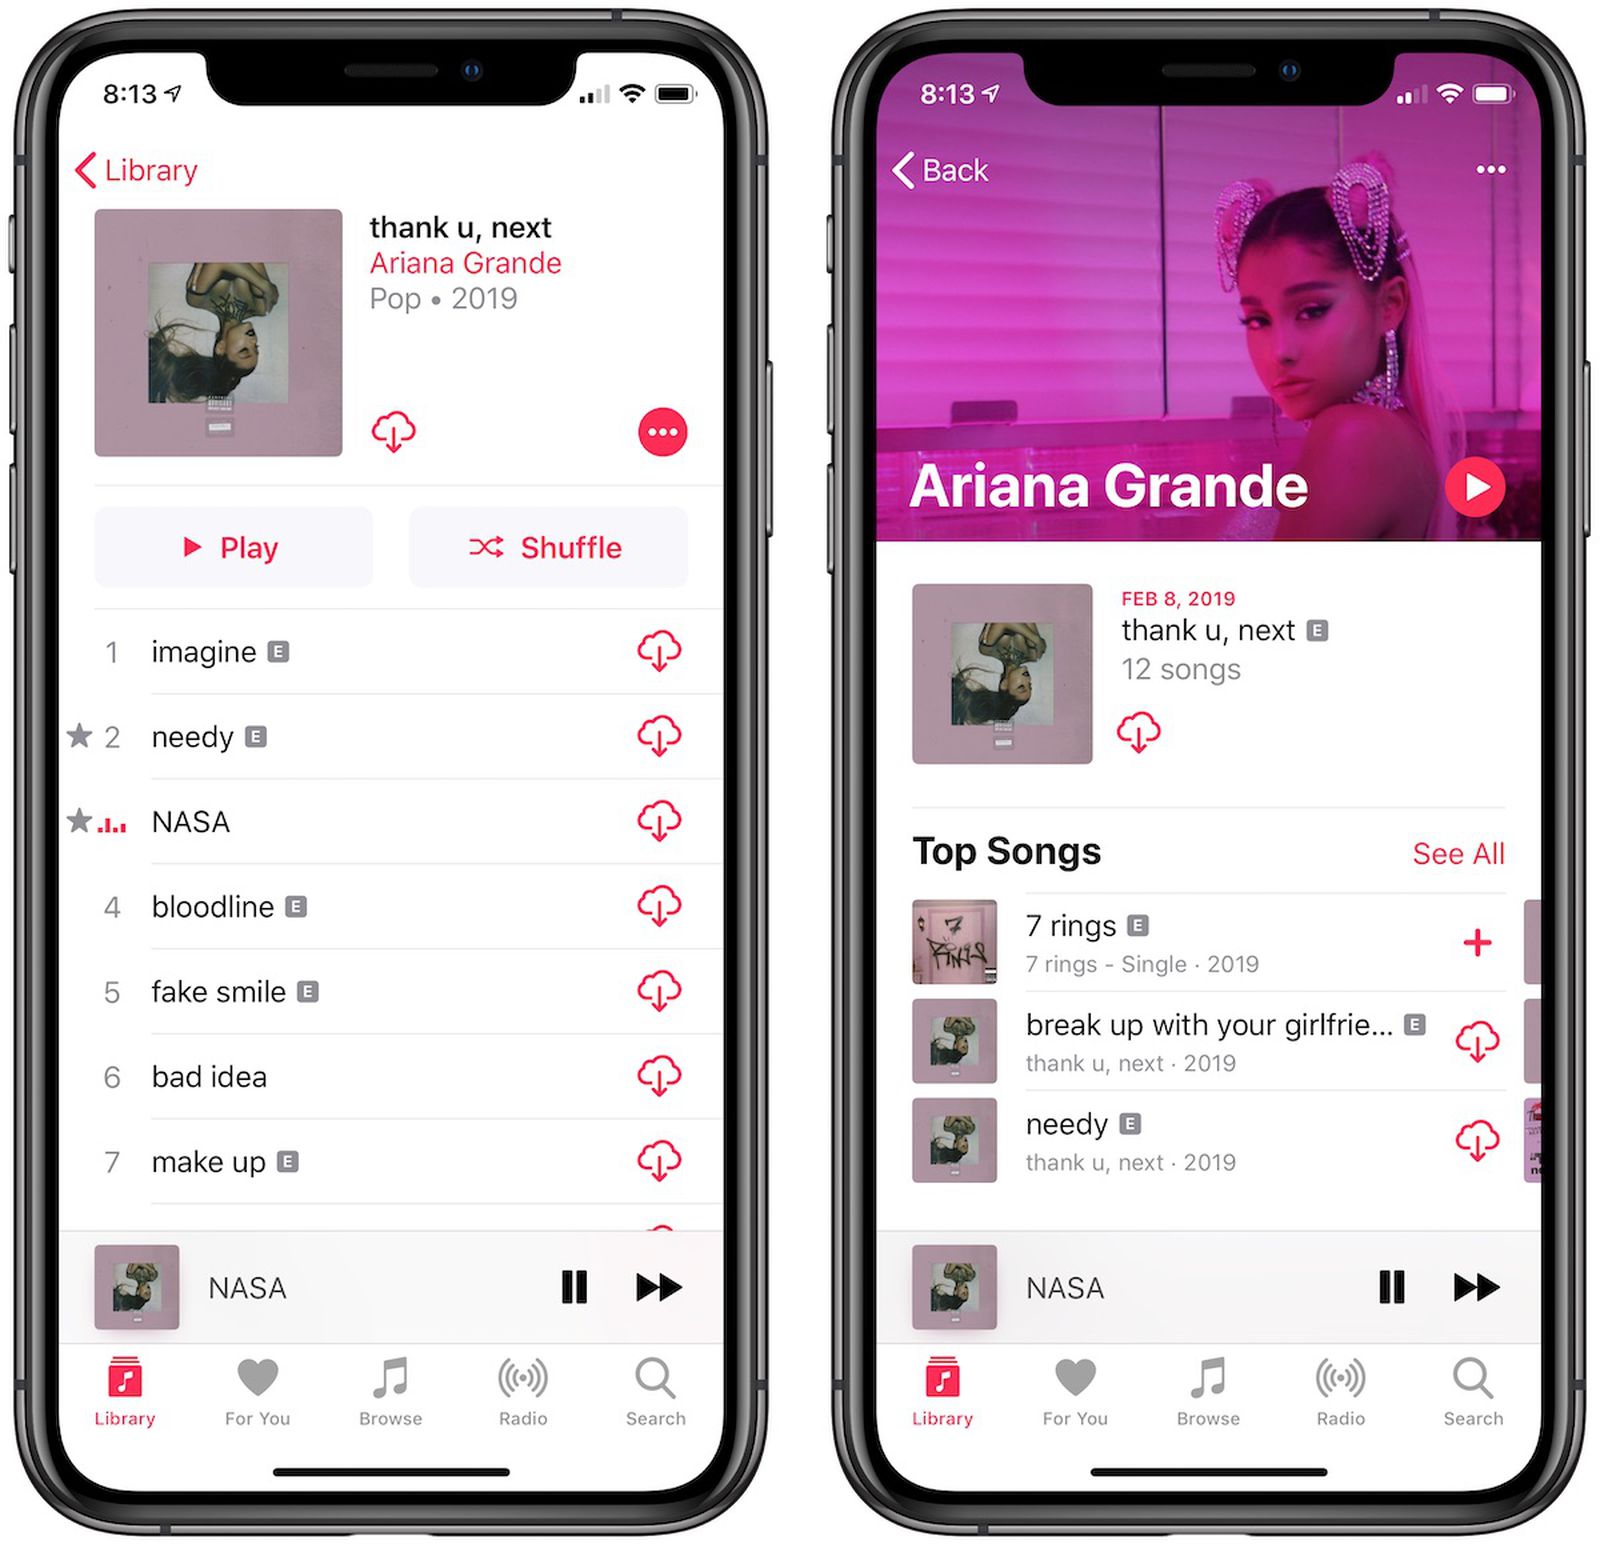 Ariana Grande S Thank U Next Breaks Apple Music Record For Most